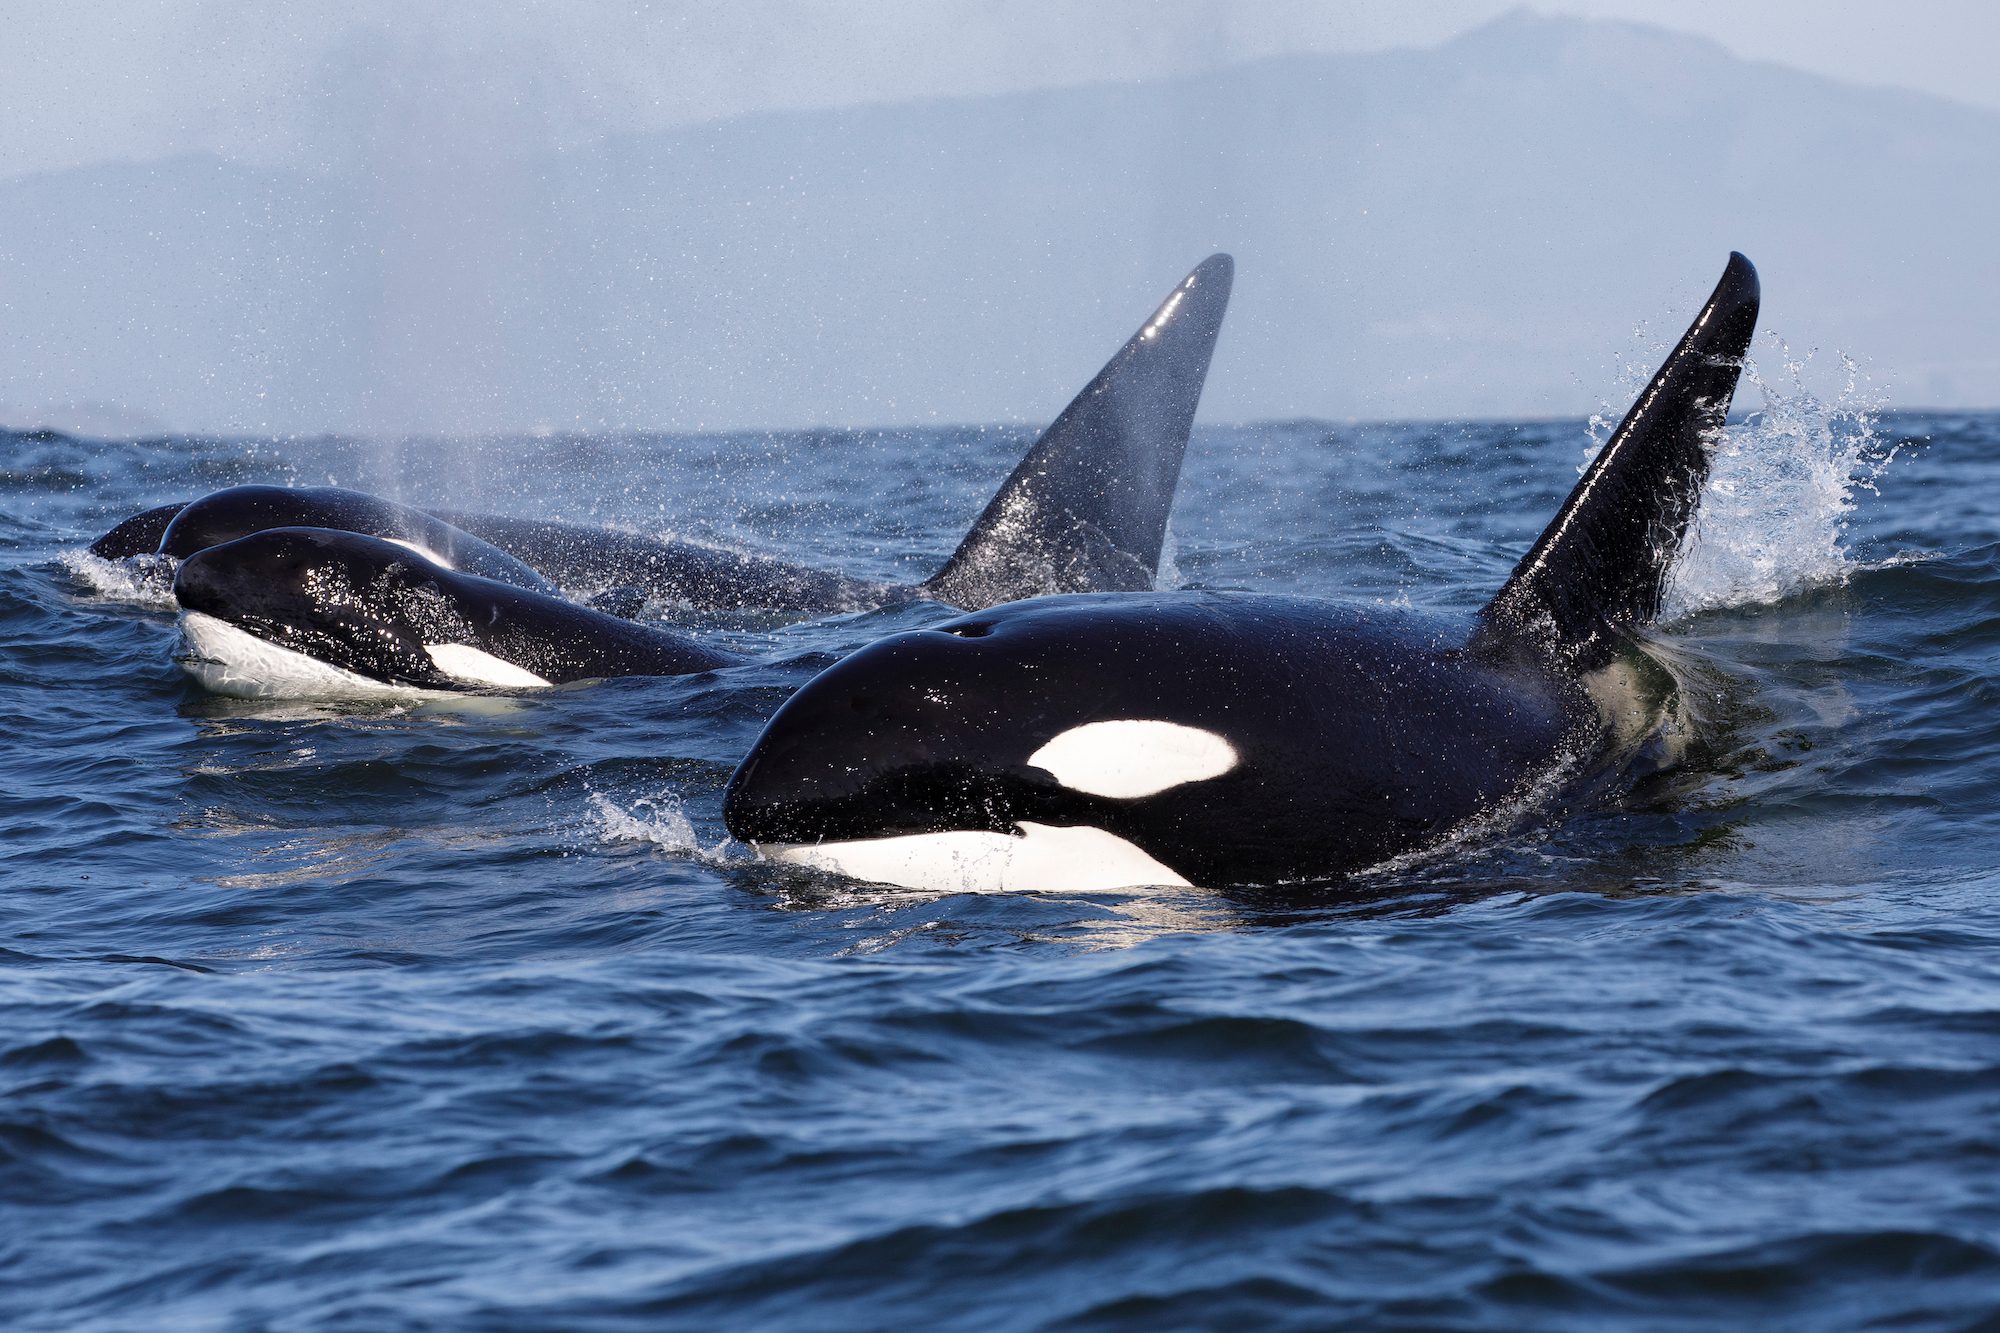 Have You Heard About the Killer Whales Attacking Boats?